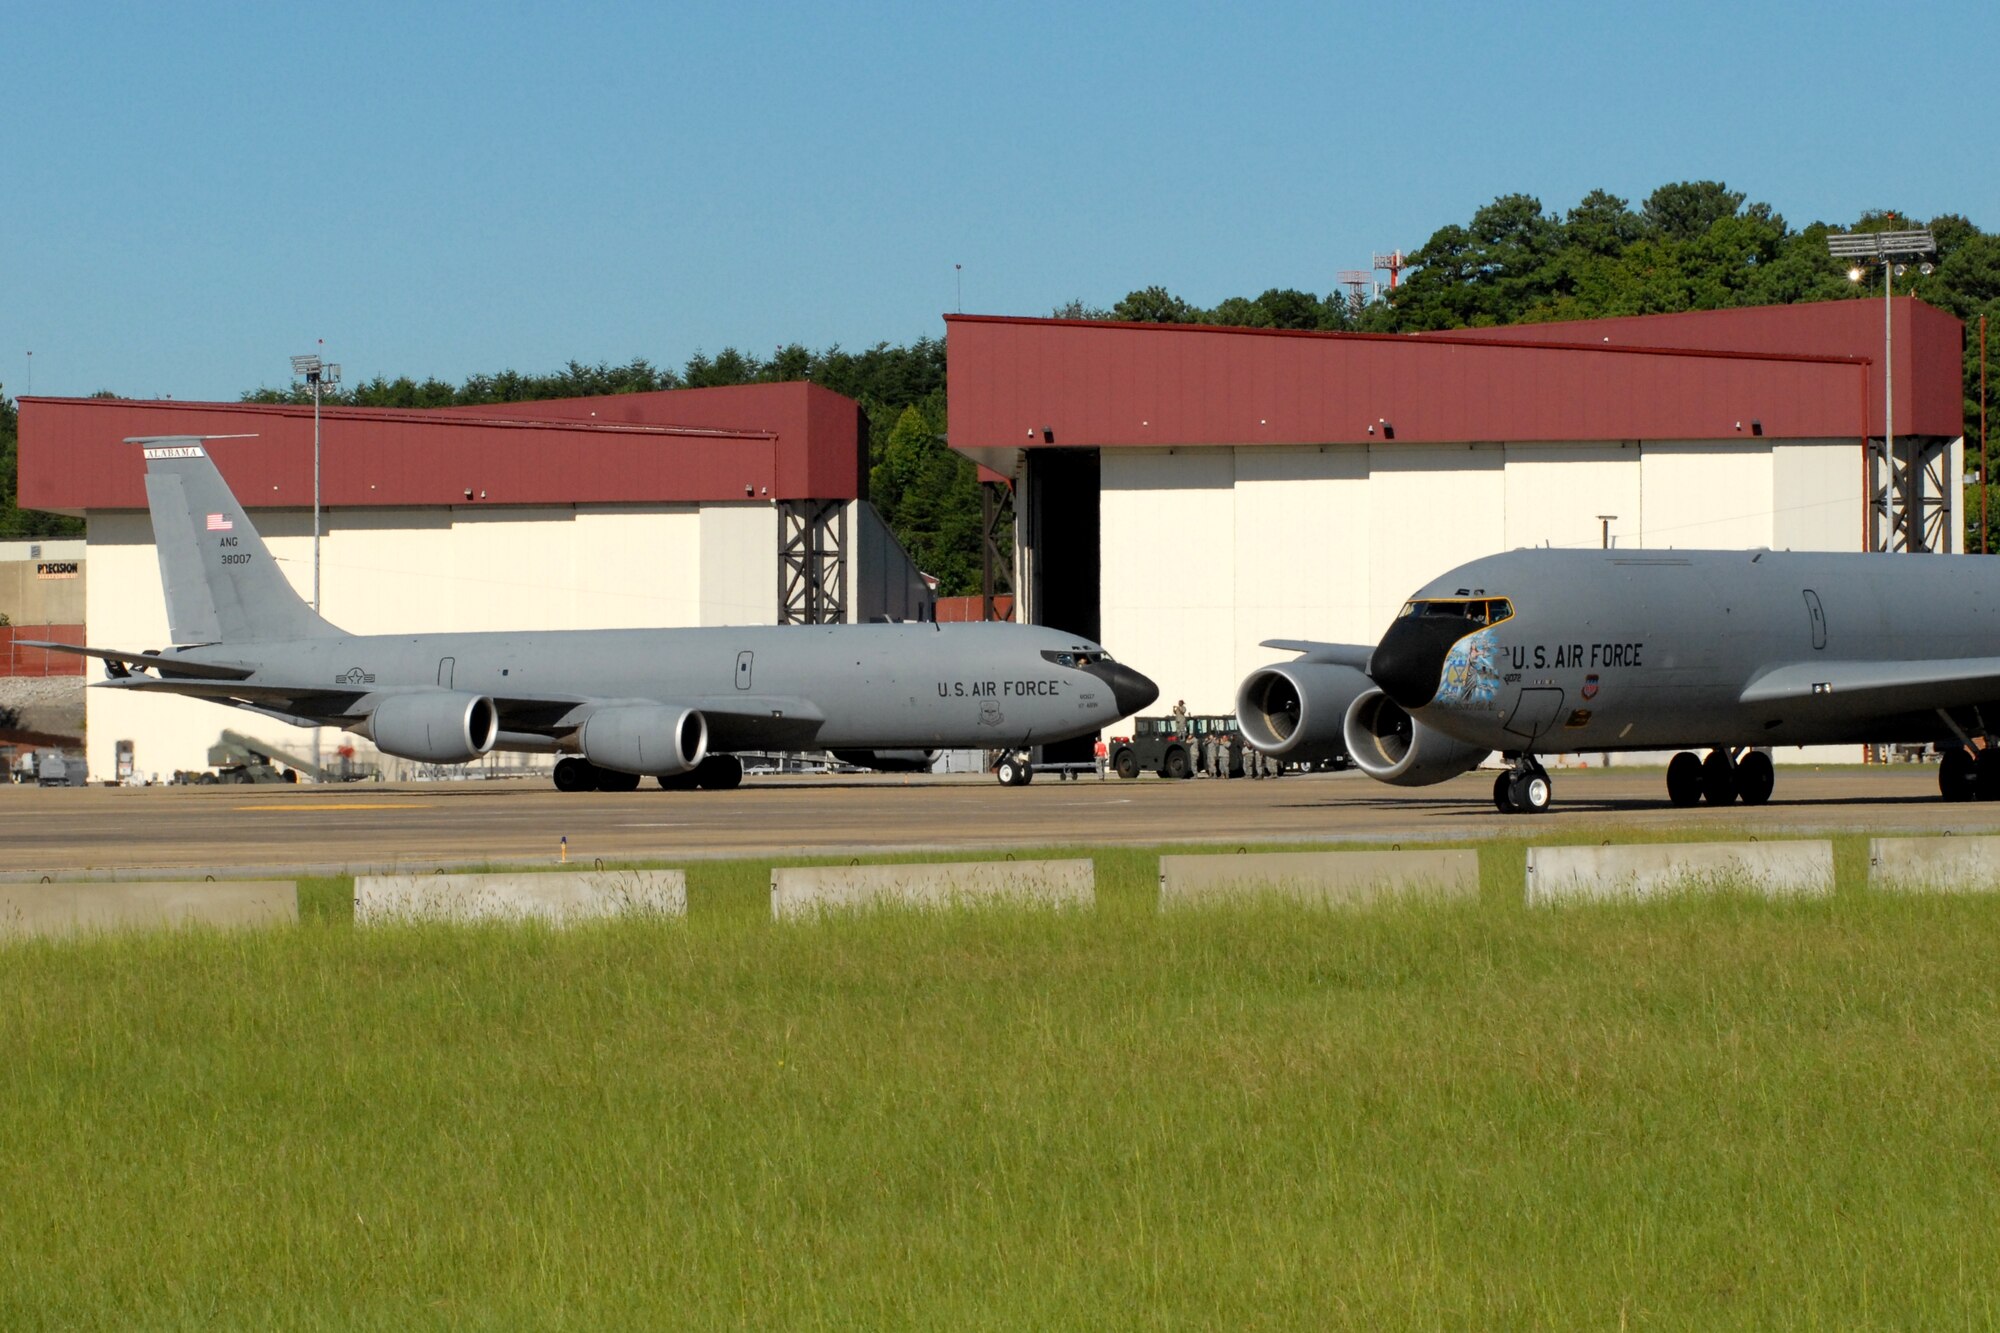 BIRMINGHAM, Ala. -- Two KC-135R aircraft taxi during five-ship training mission here on Saturday. Four of the KC-135s refueled A-10 aircraft. The fifth KC-135R returned to base after the formation training was complete. A KC-135R from the 171st Air Refueling Wing in Pittsburgh, Pa. was flown in the formation and was used during the refueling mission. (U.S. Air National Guard photo by Maj. Pam Carroll/Released)